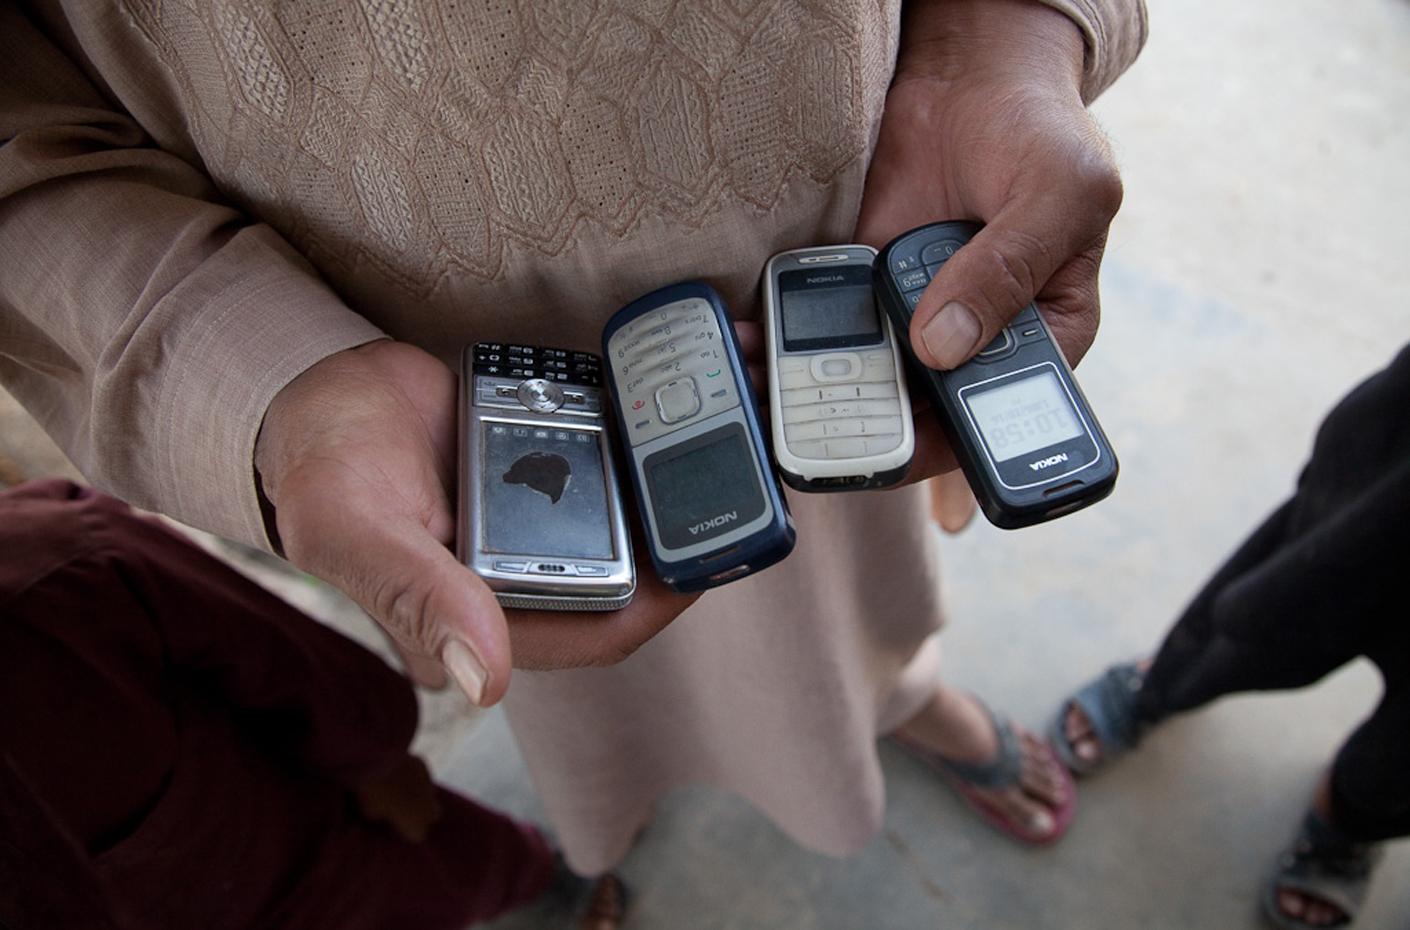 UCI IMTFI researcher Jan Chipchase studies Afghan monetary practices to learn how the emerging mobile money industry could make a lasting economic impact